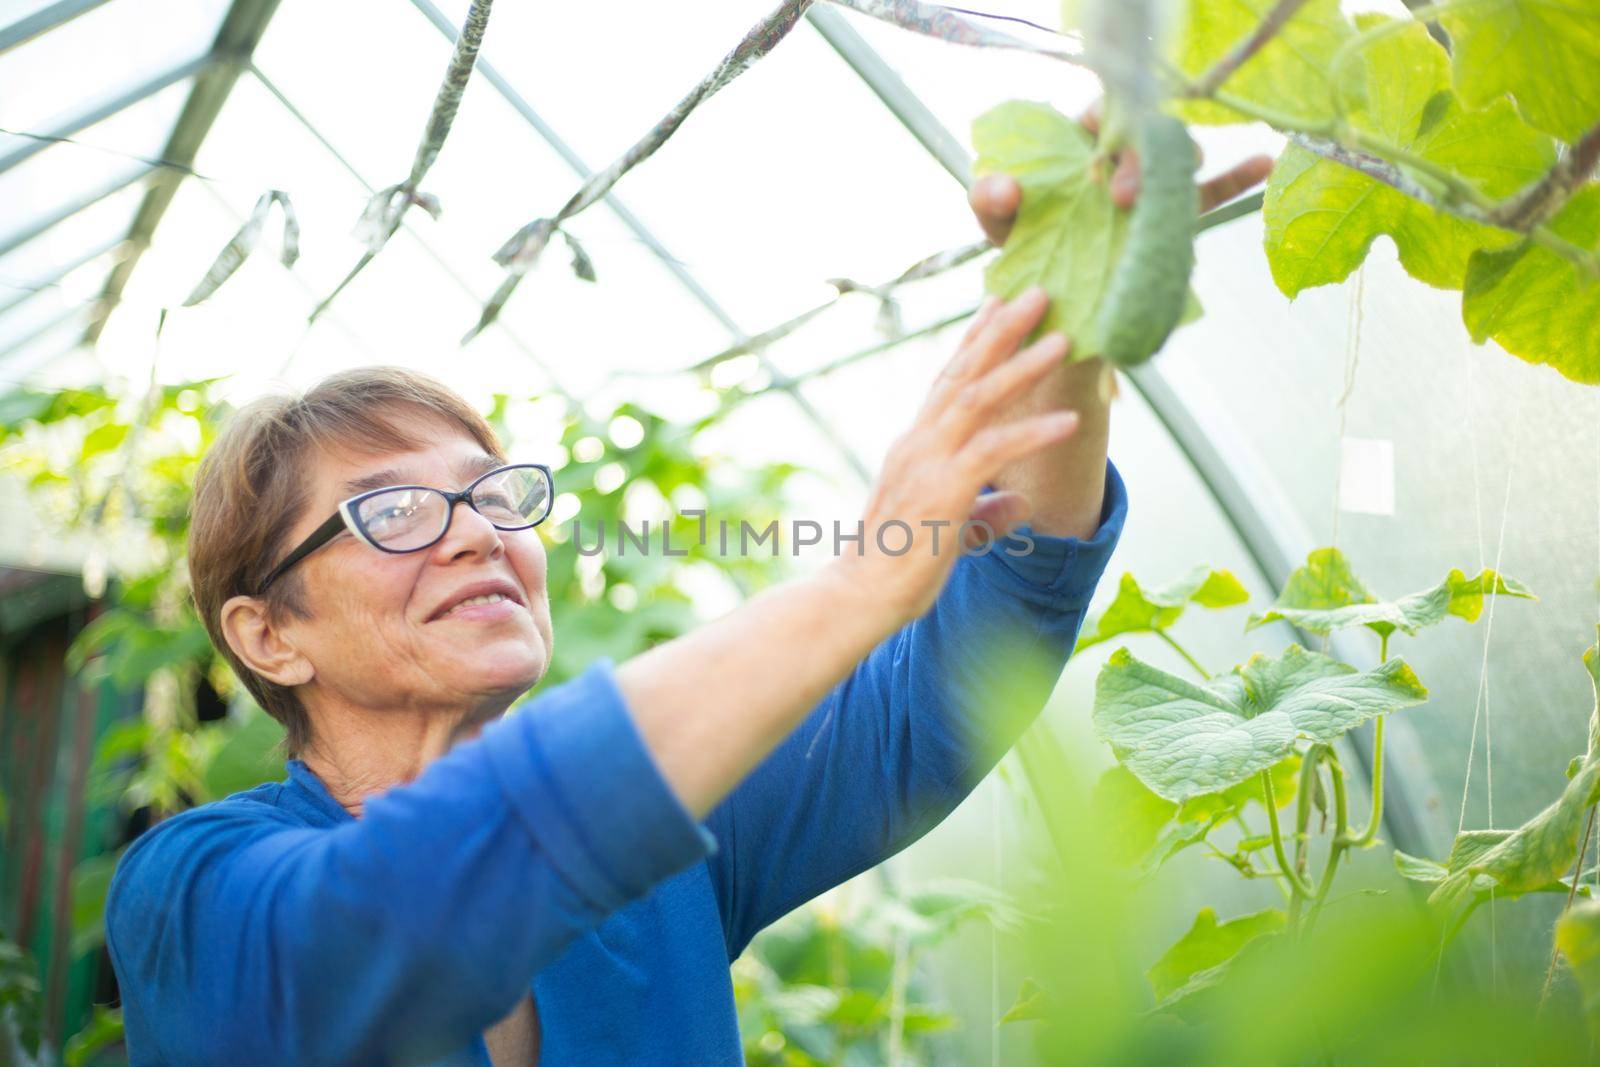 Happy smiling mature woman take care of cucumbers in greenhouse, farming, gardening, old age and people concept, harvesting hobby and leisure